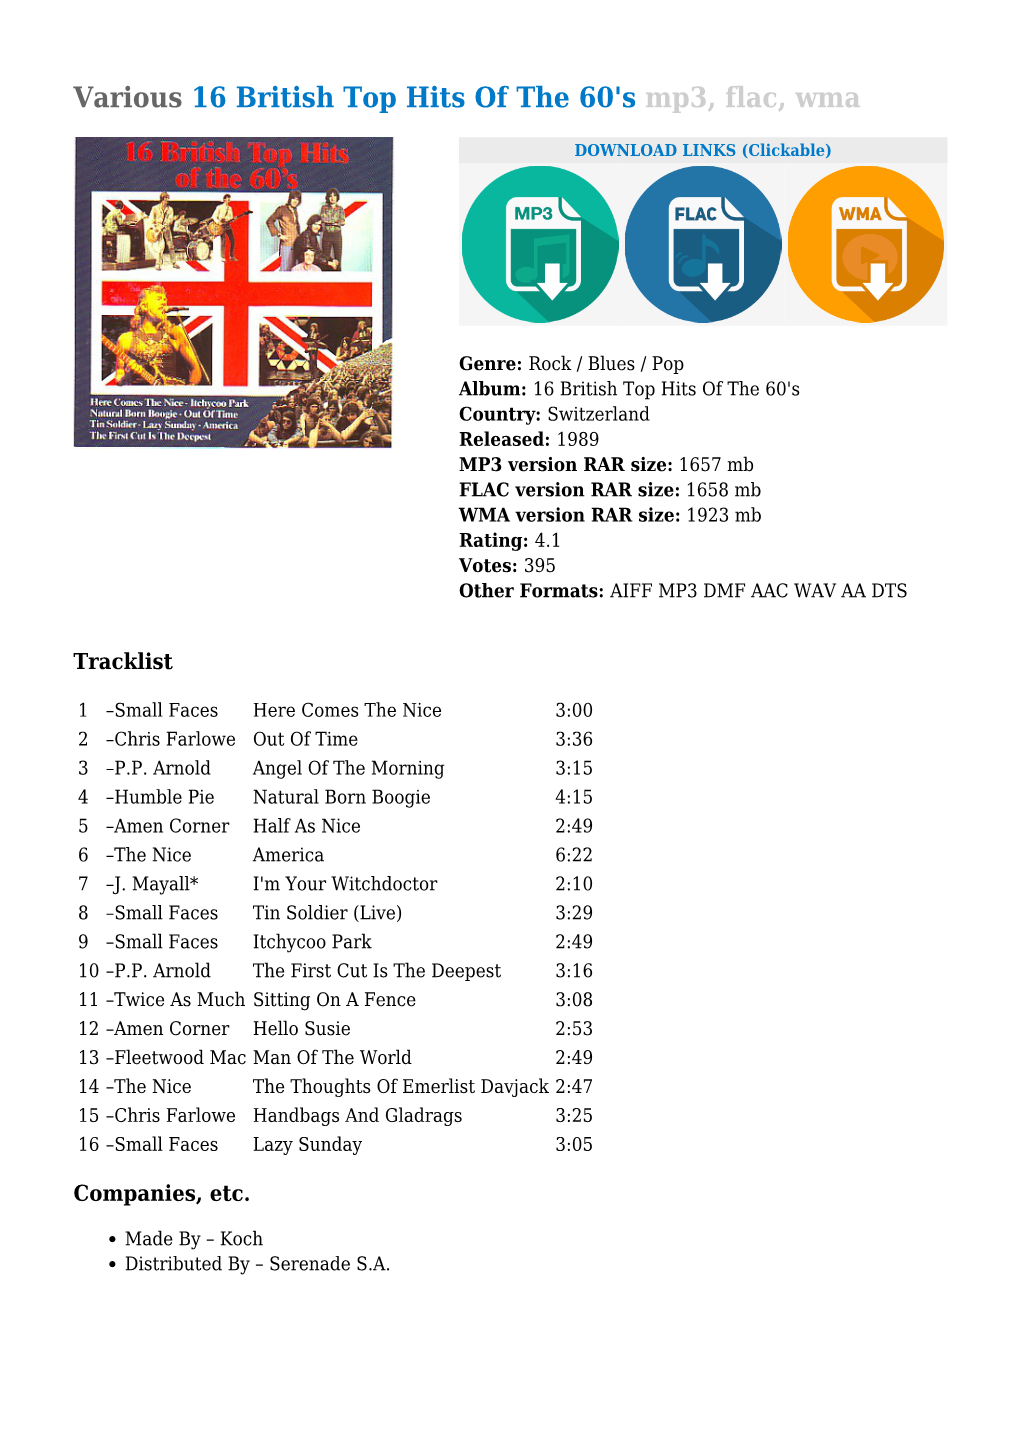 Various 16 British Top Hits of the 60'S Mp3, Flac, Wma